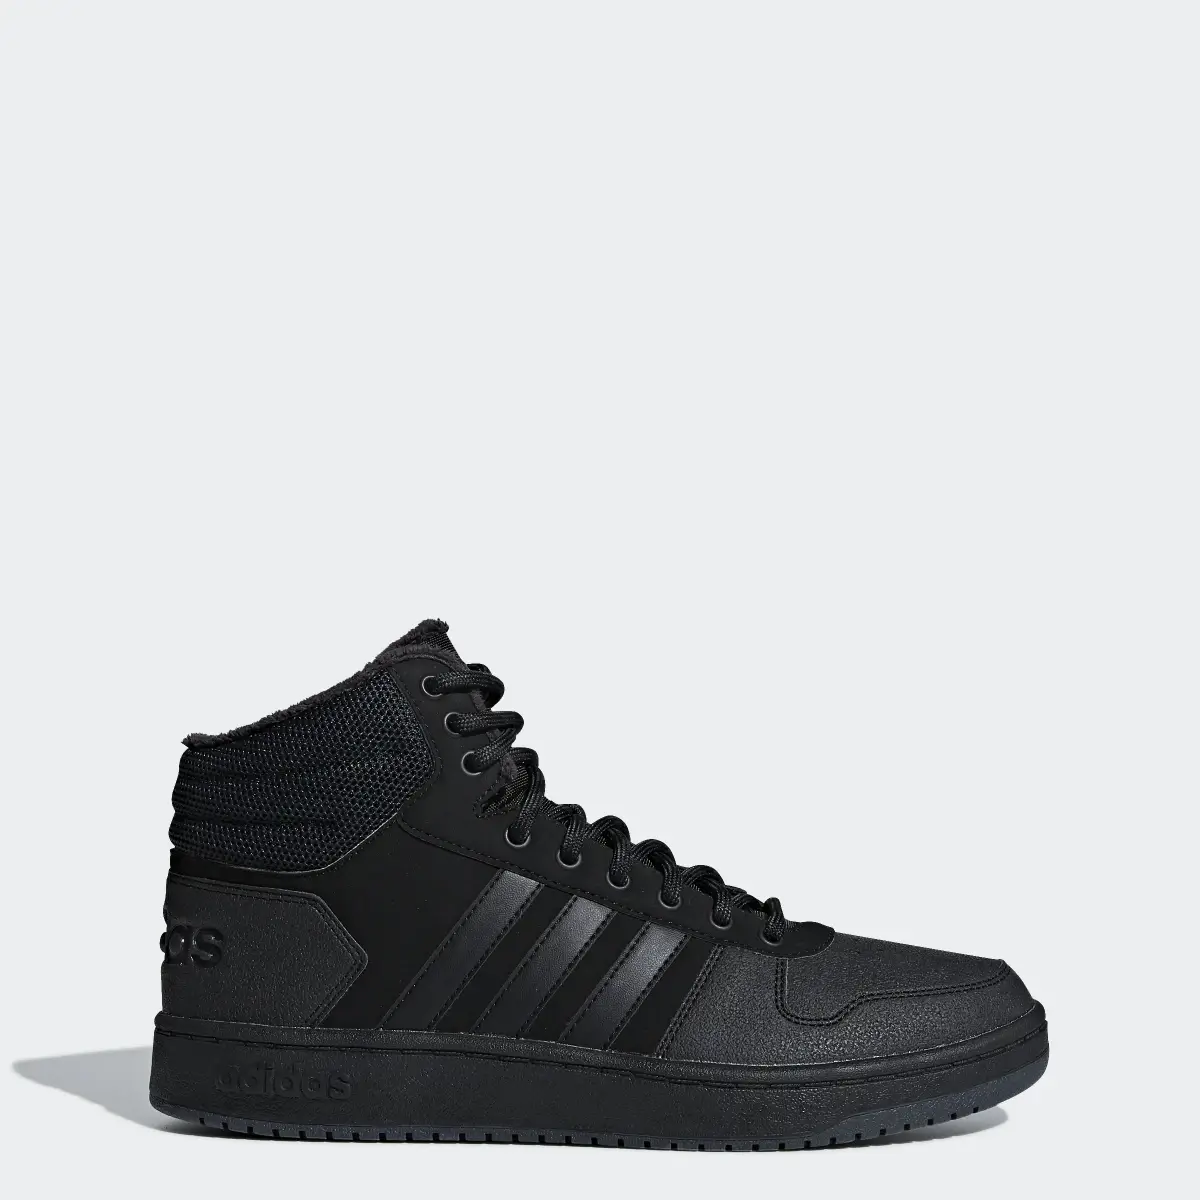 Adidas Hoops 2.0 Mid Shoes. 1